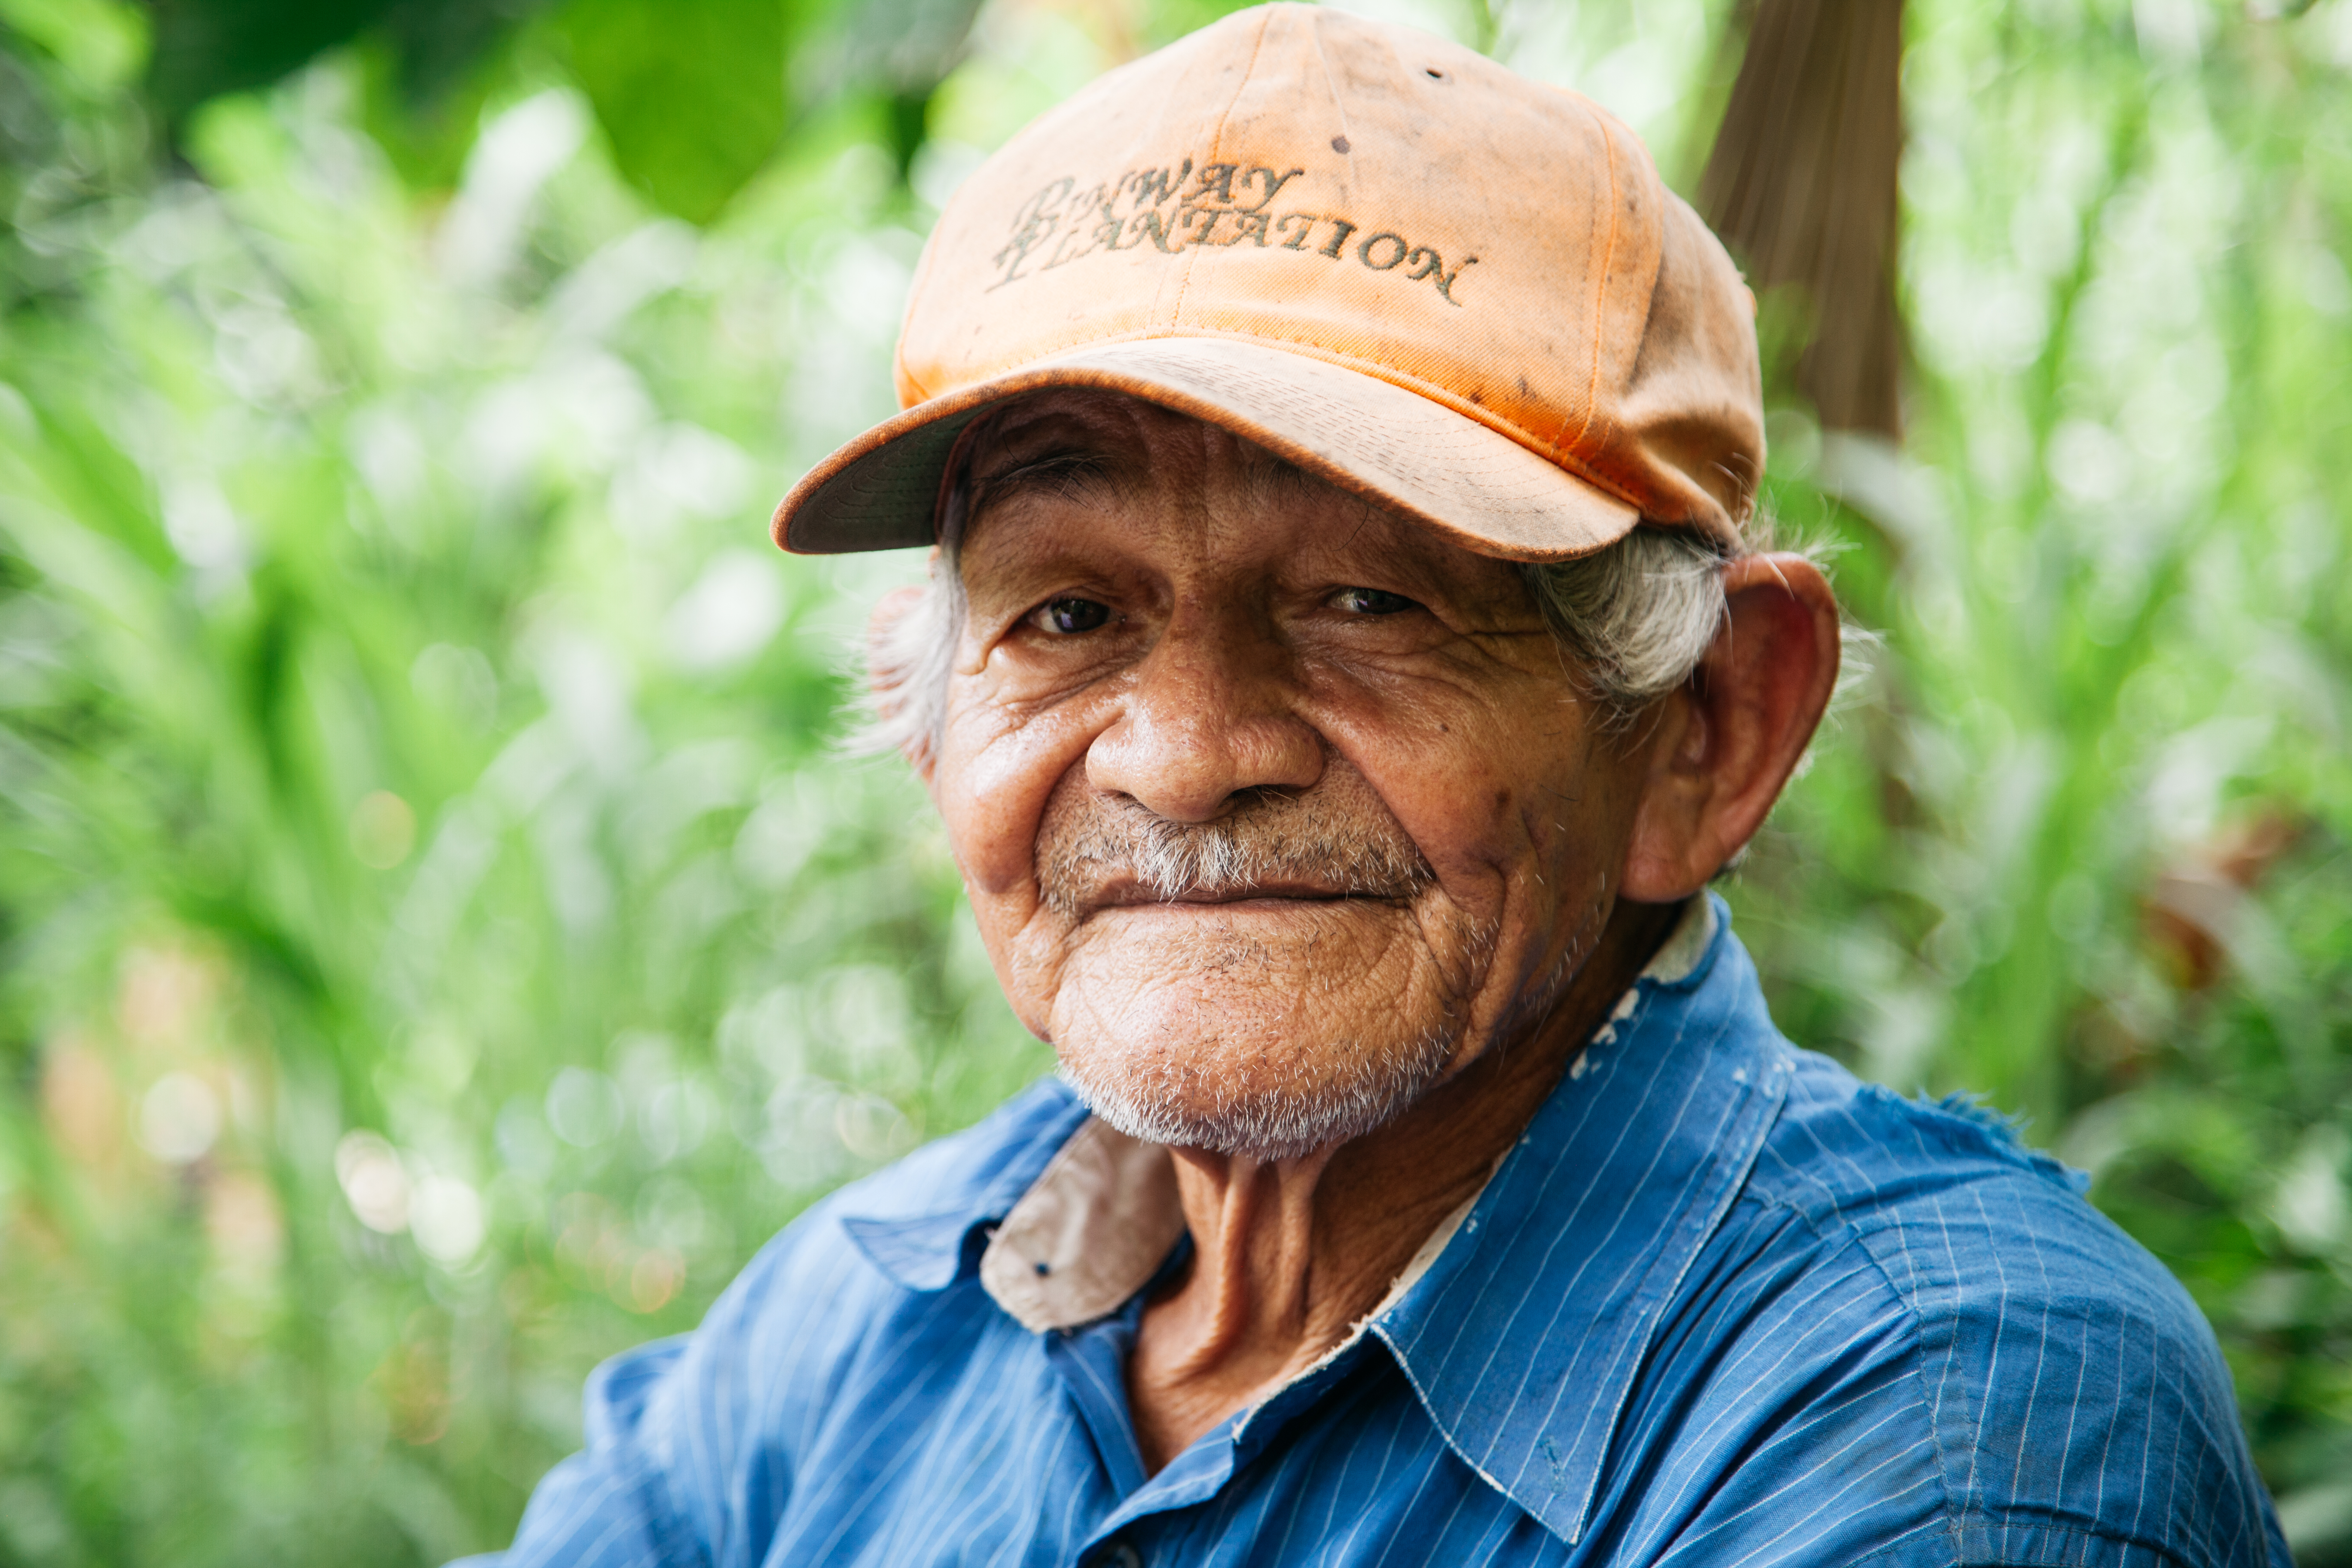 A close-up potrait of the wrinkled face of a male cocoa farmer from Honduras